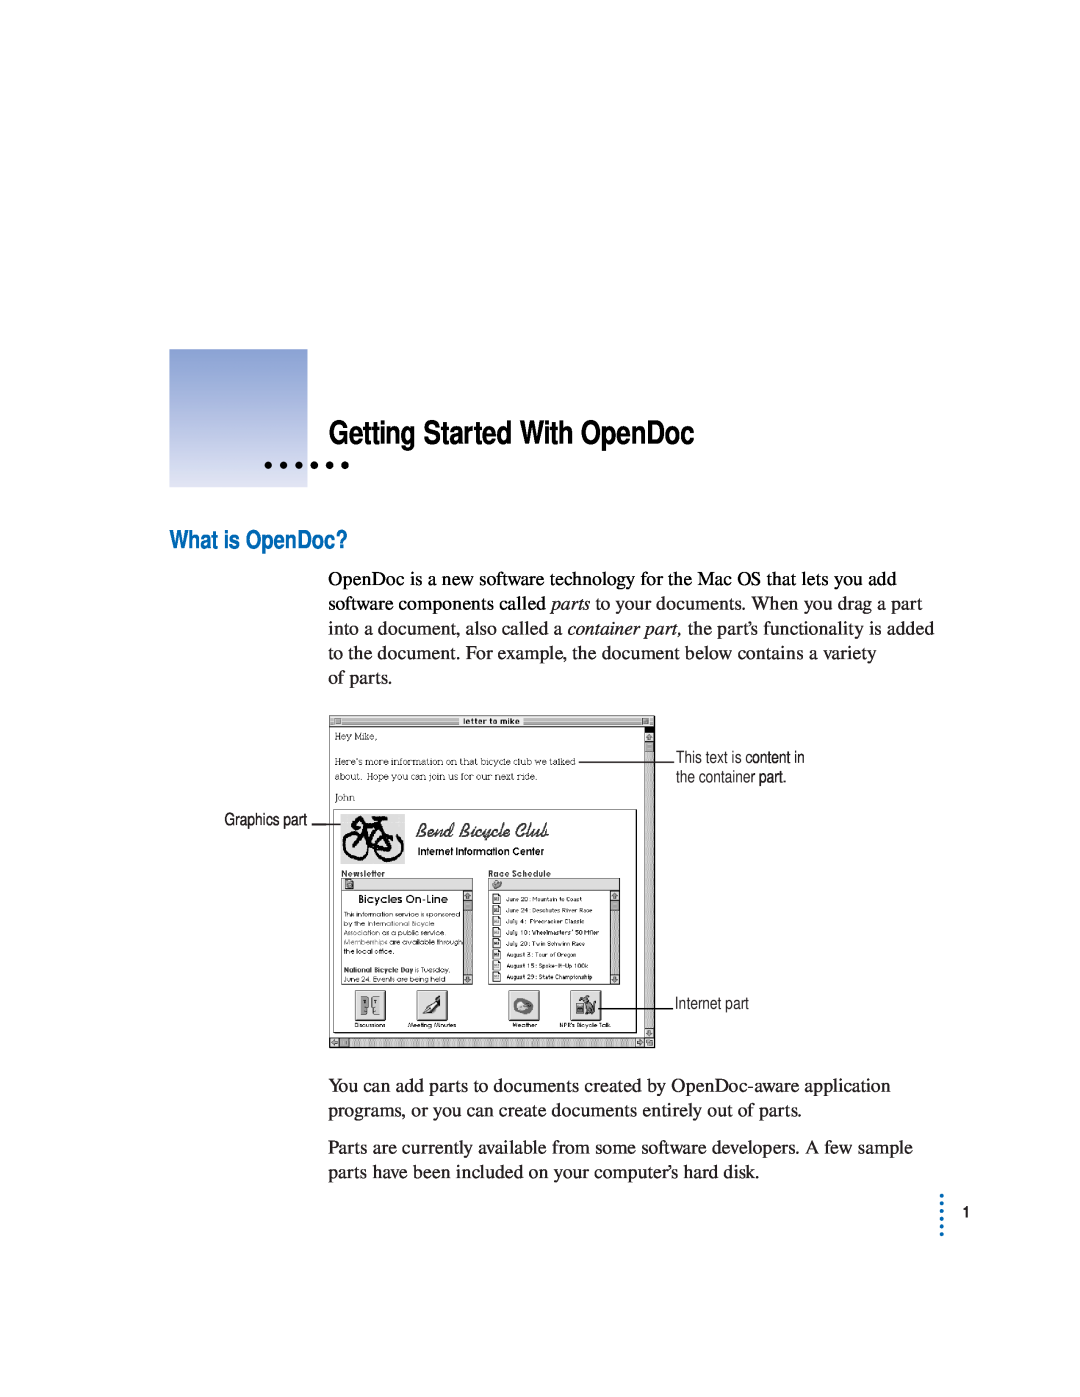 Apple 034-0048-B, U96511-109B manual What is OpenDoc?, Getting Started With OpenDoc 